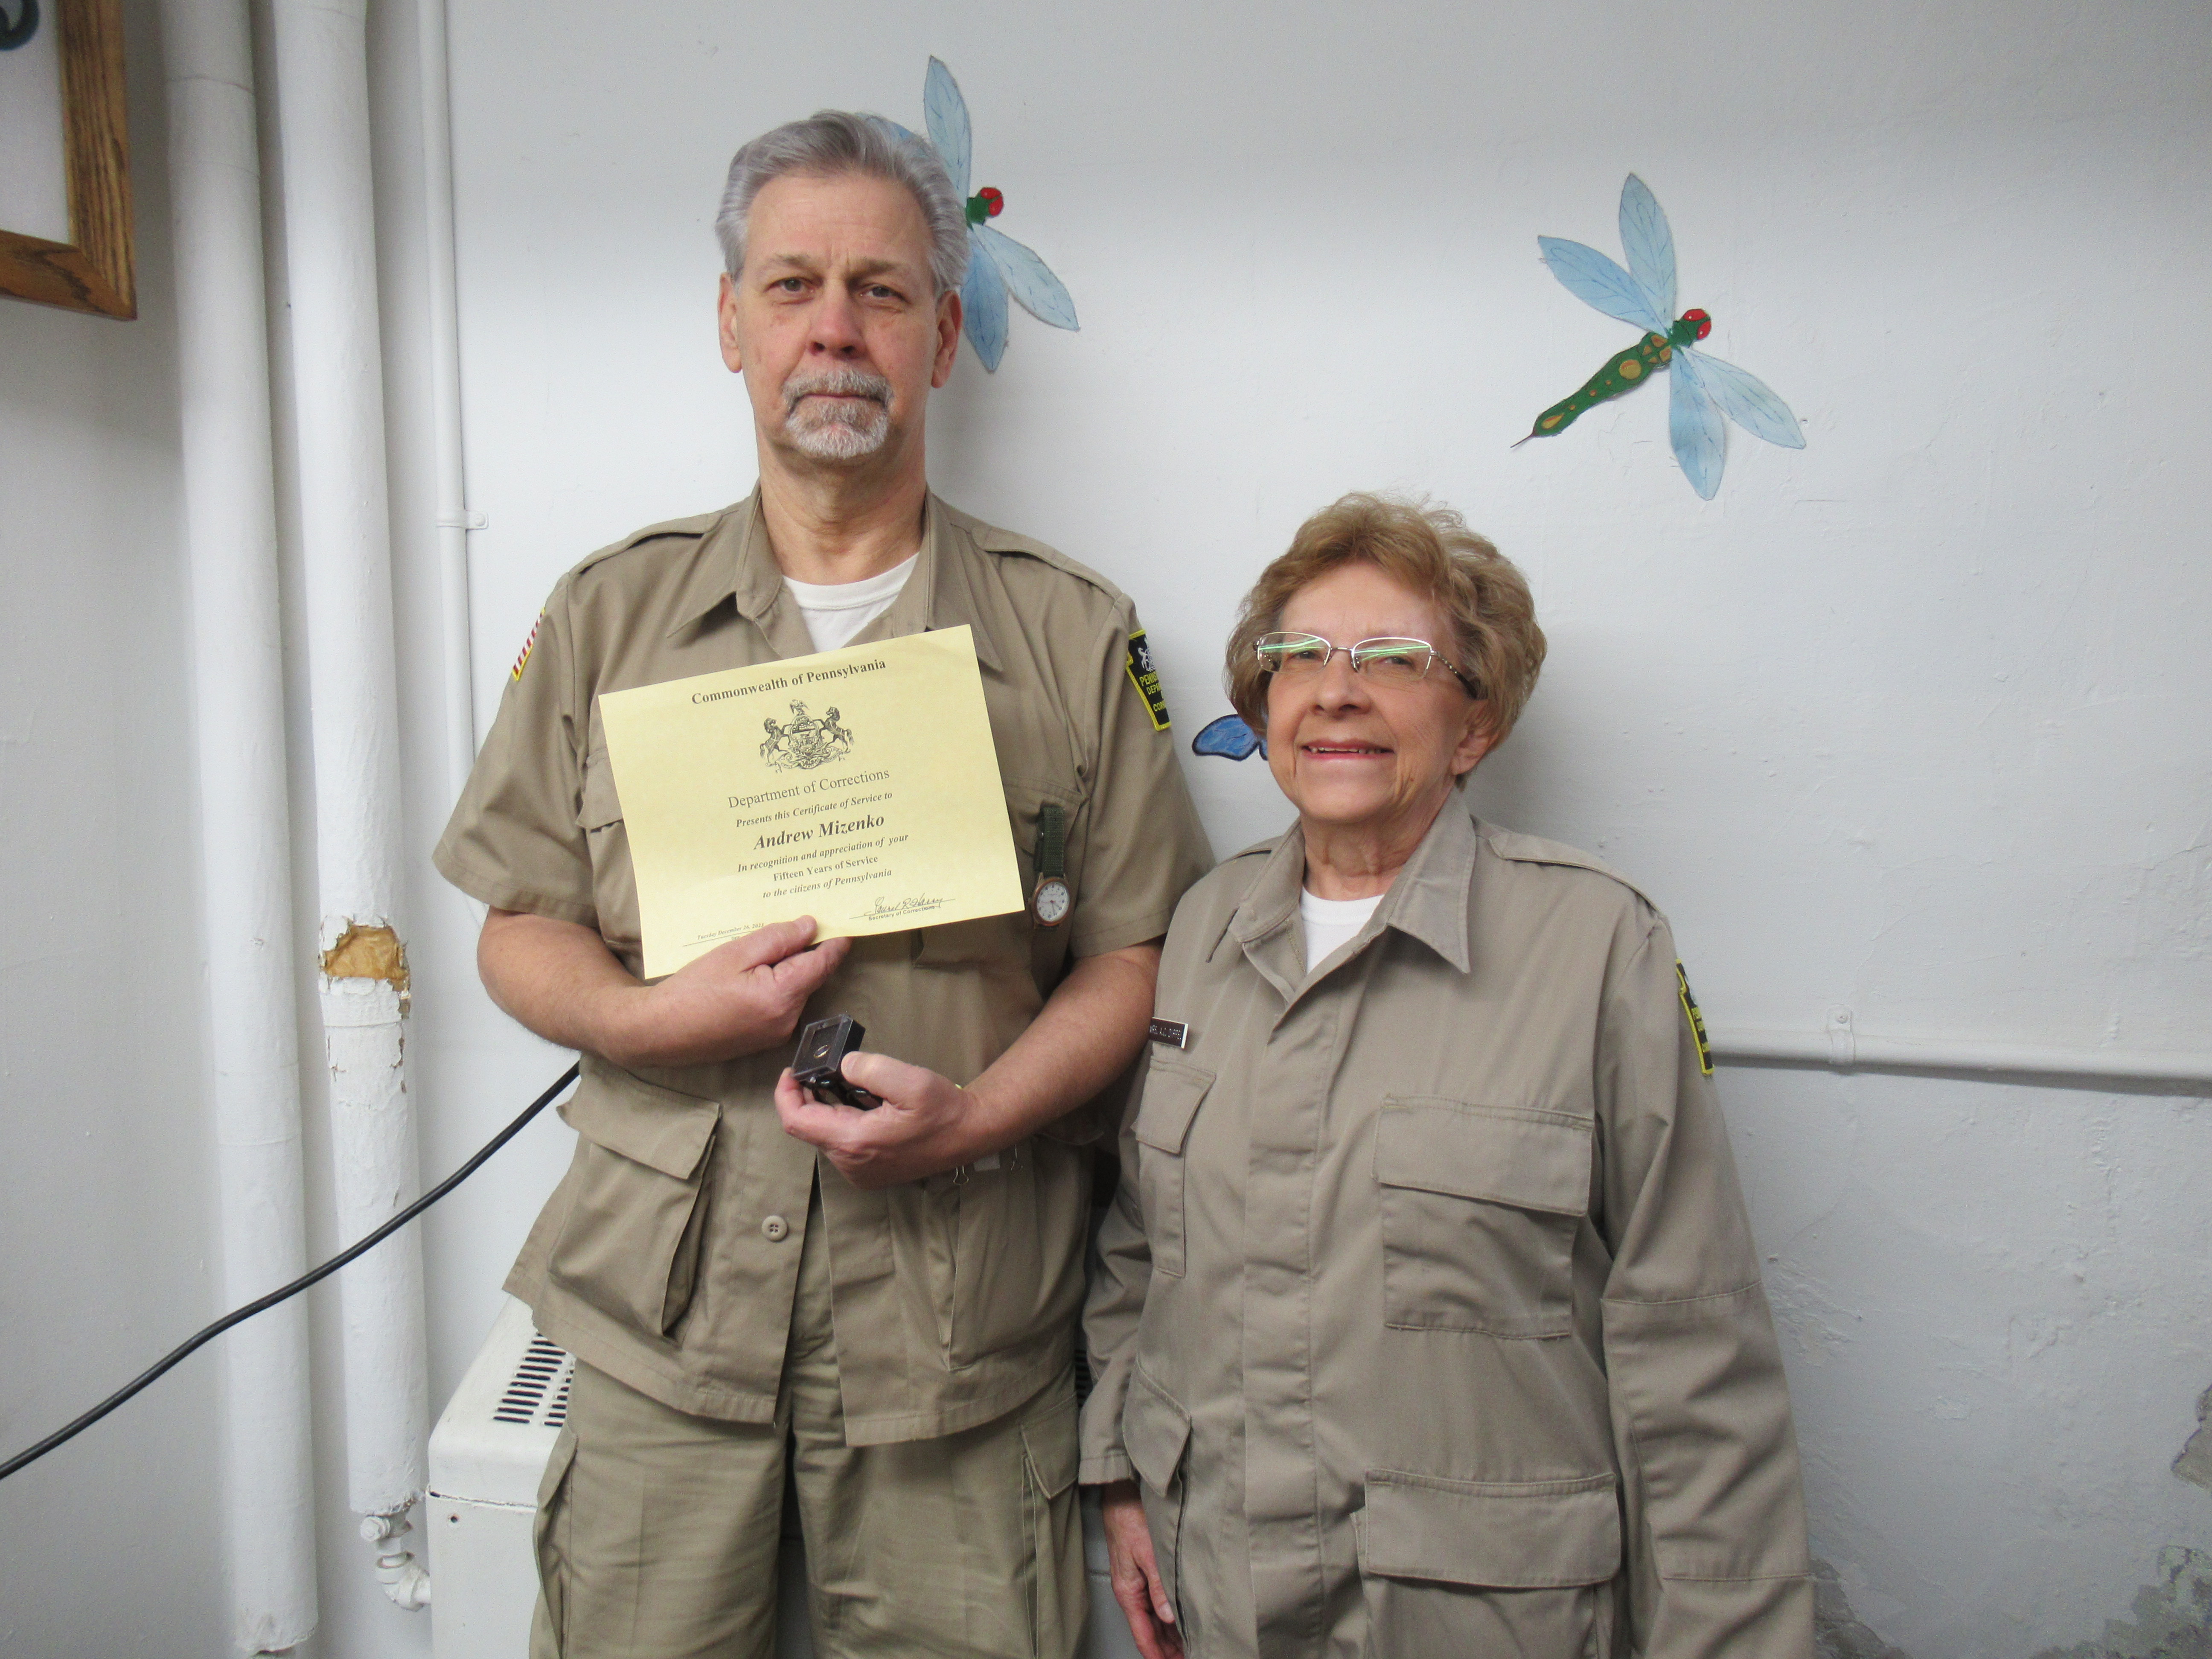 Garment Factory Foreman ​Andrew Mizenko​ holds a certificate while standing with his supervisor